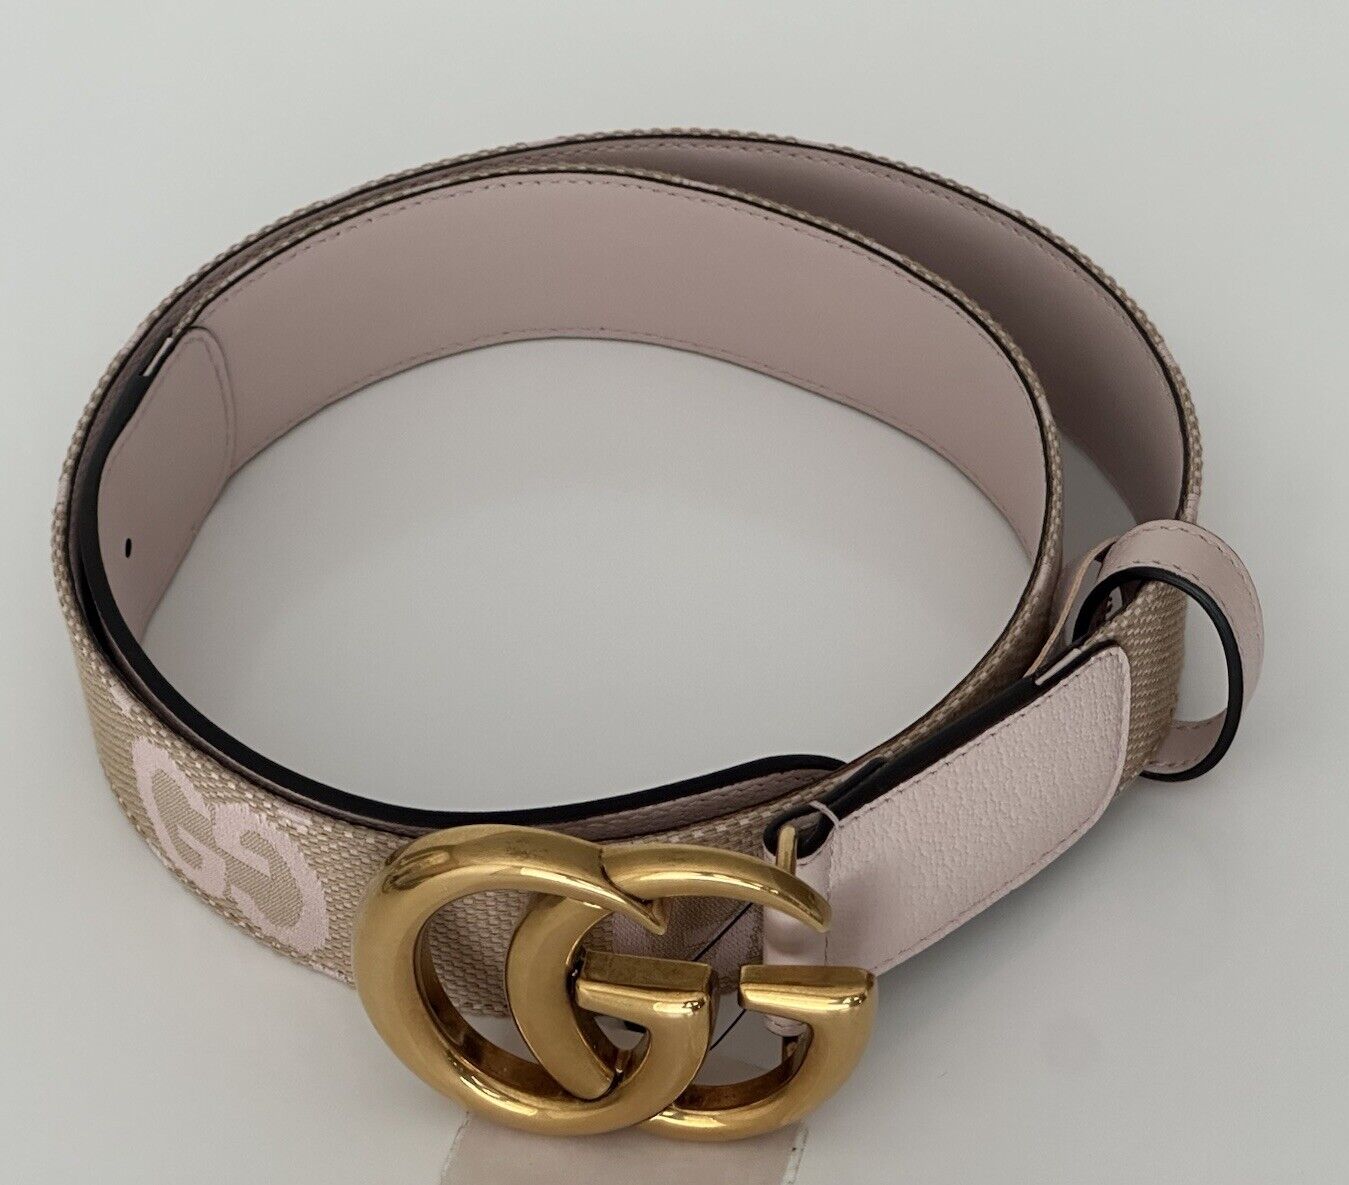 Gucci Women's GG Marmont Wide Belt in Pink Canvas/Leather 95/38 Italy 400593 NWT